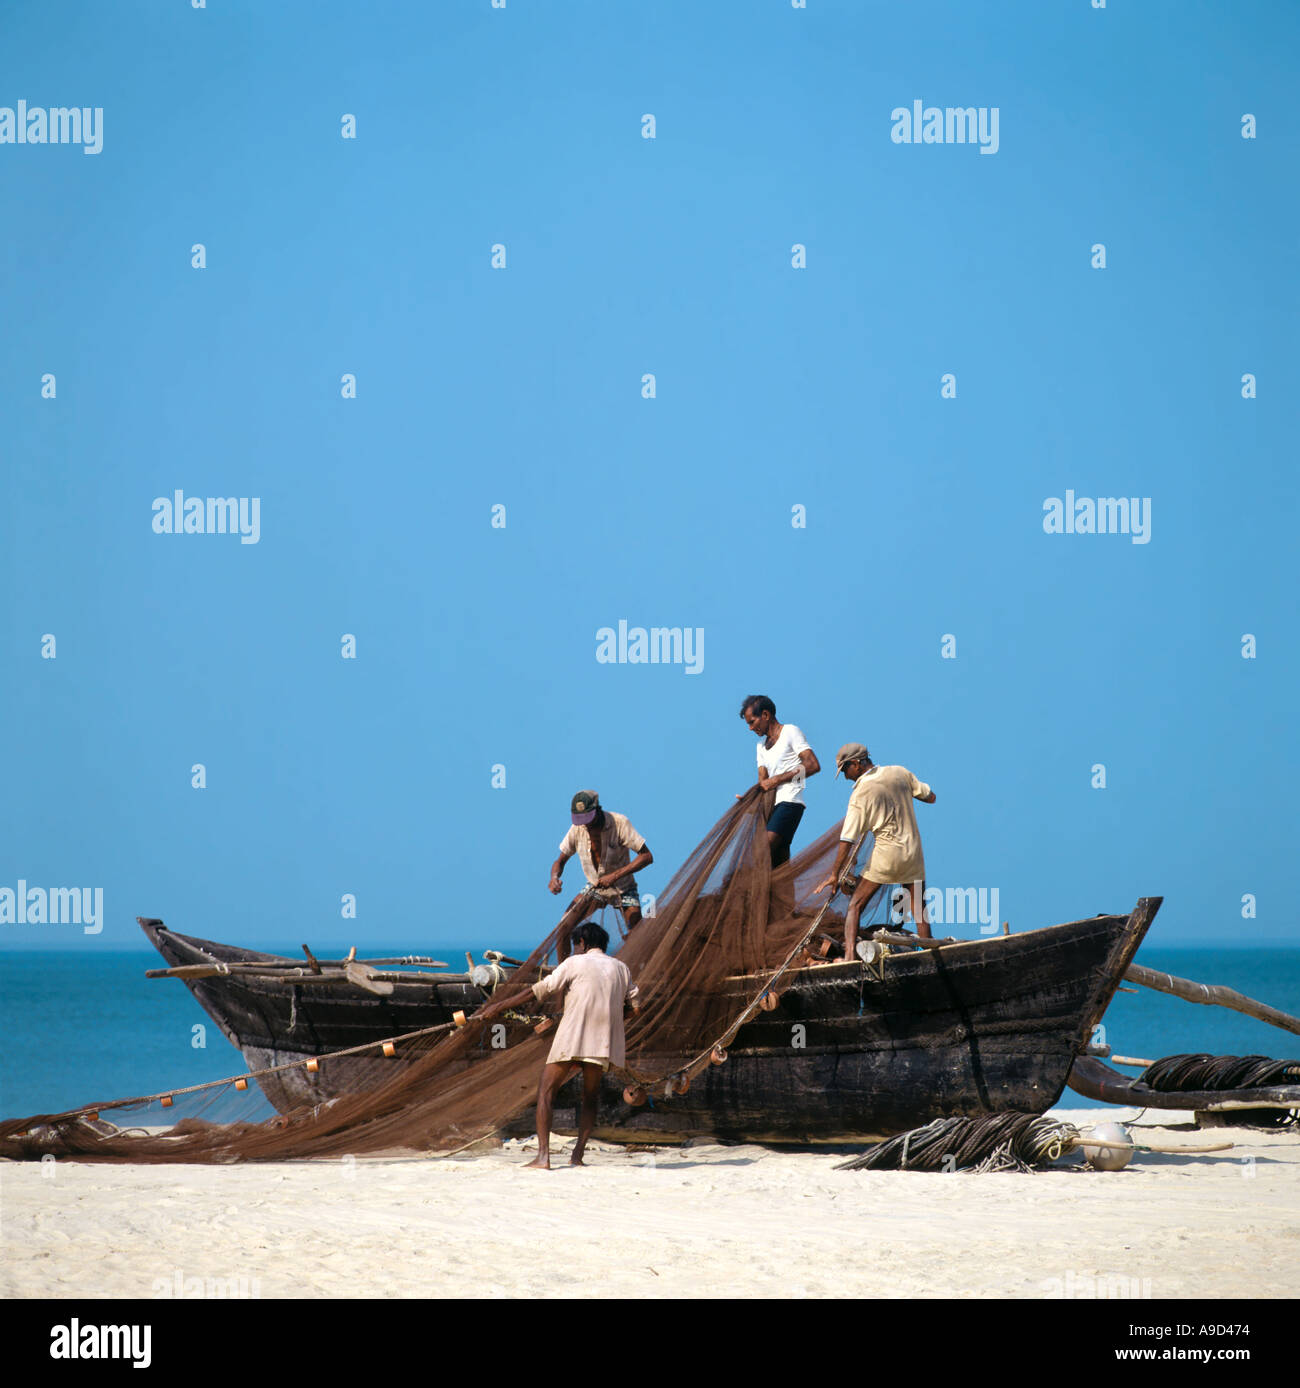 https://c8.alamy.com/comp/A9D474/fishermen-folding-up-their-nets-on-a-fishing-boat-on-a-beach-in-south-A9D474.jpg